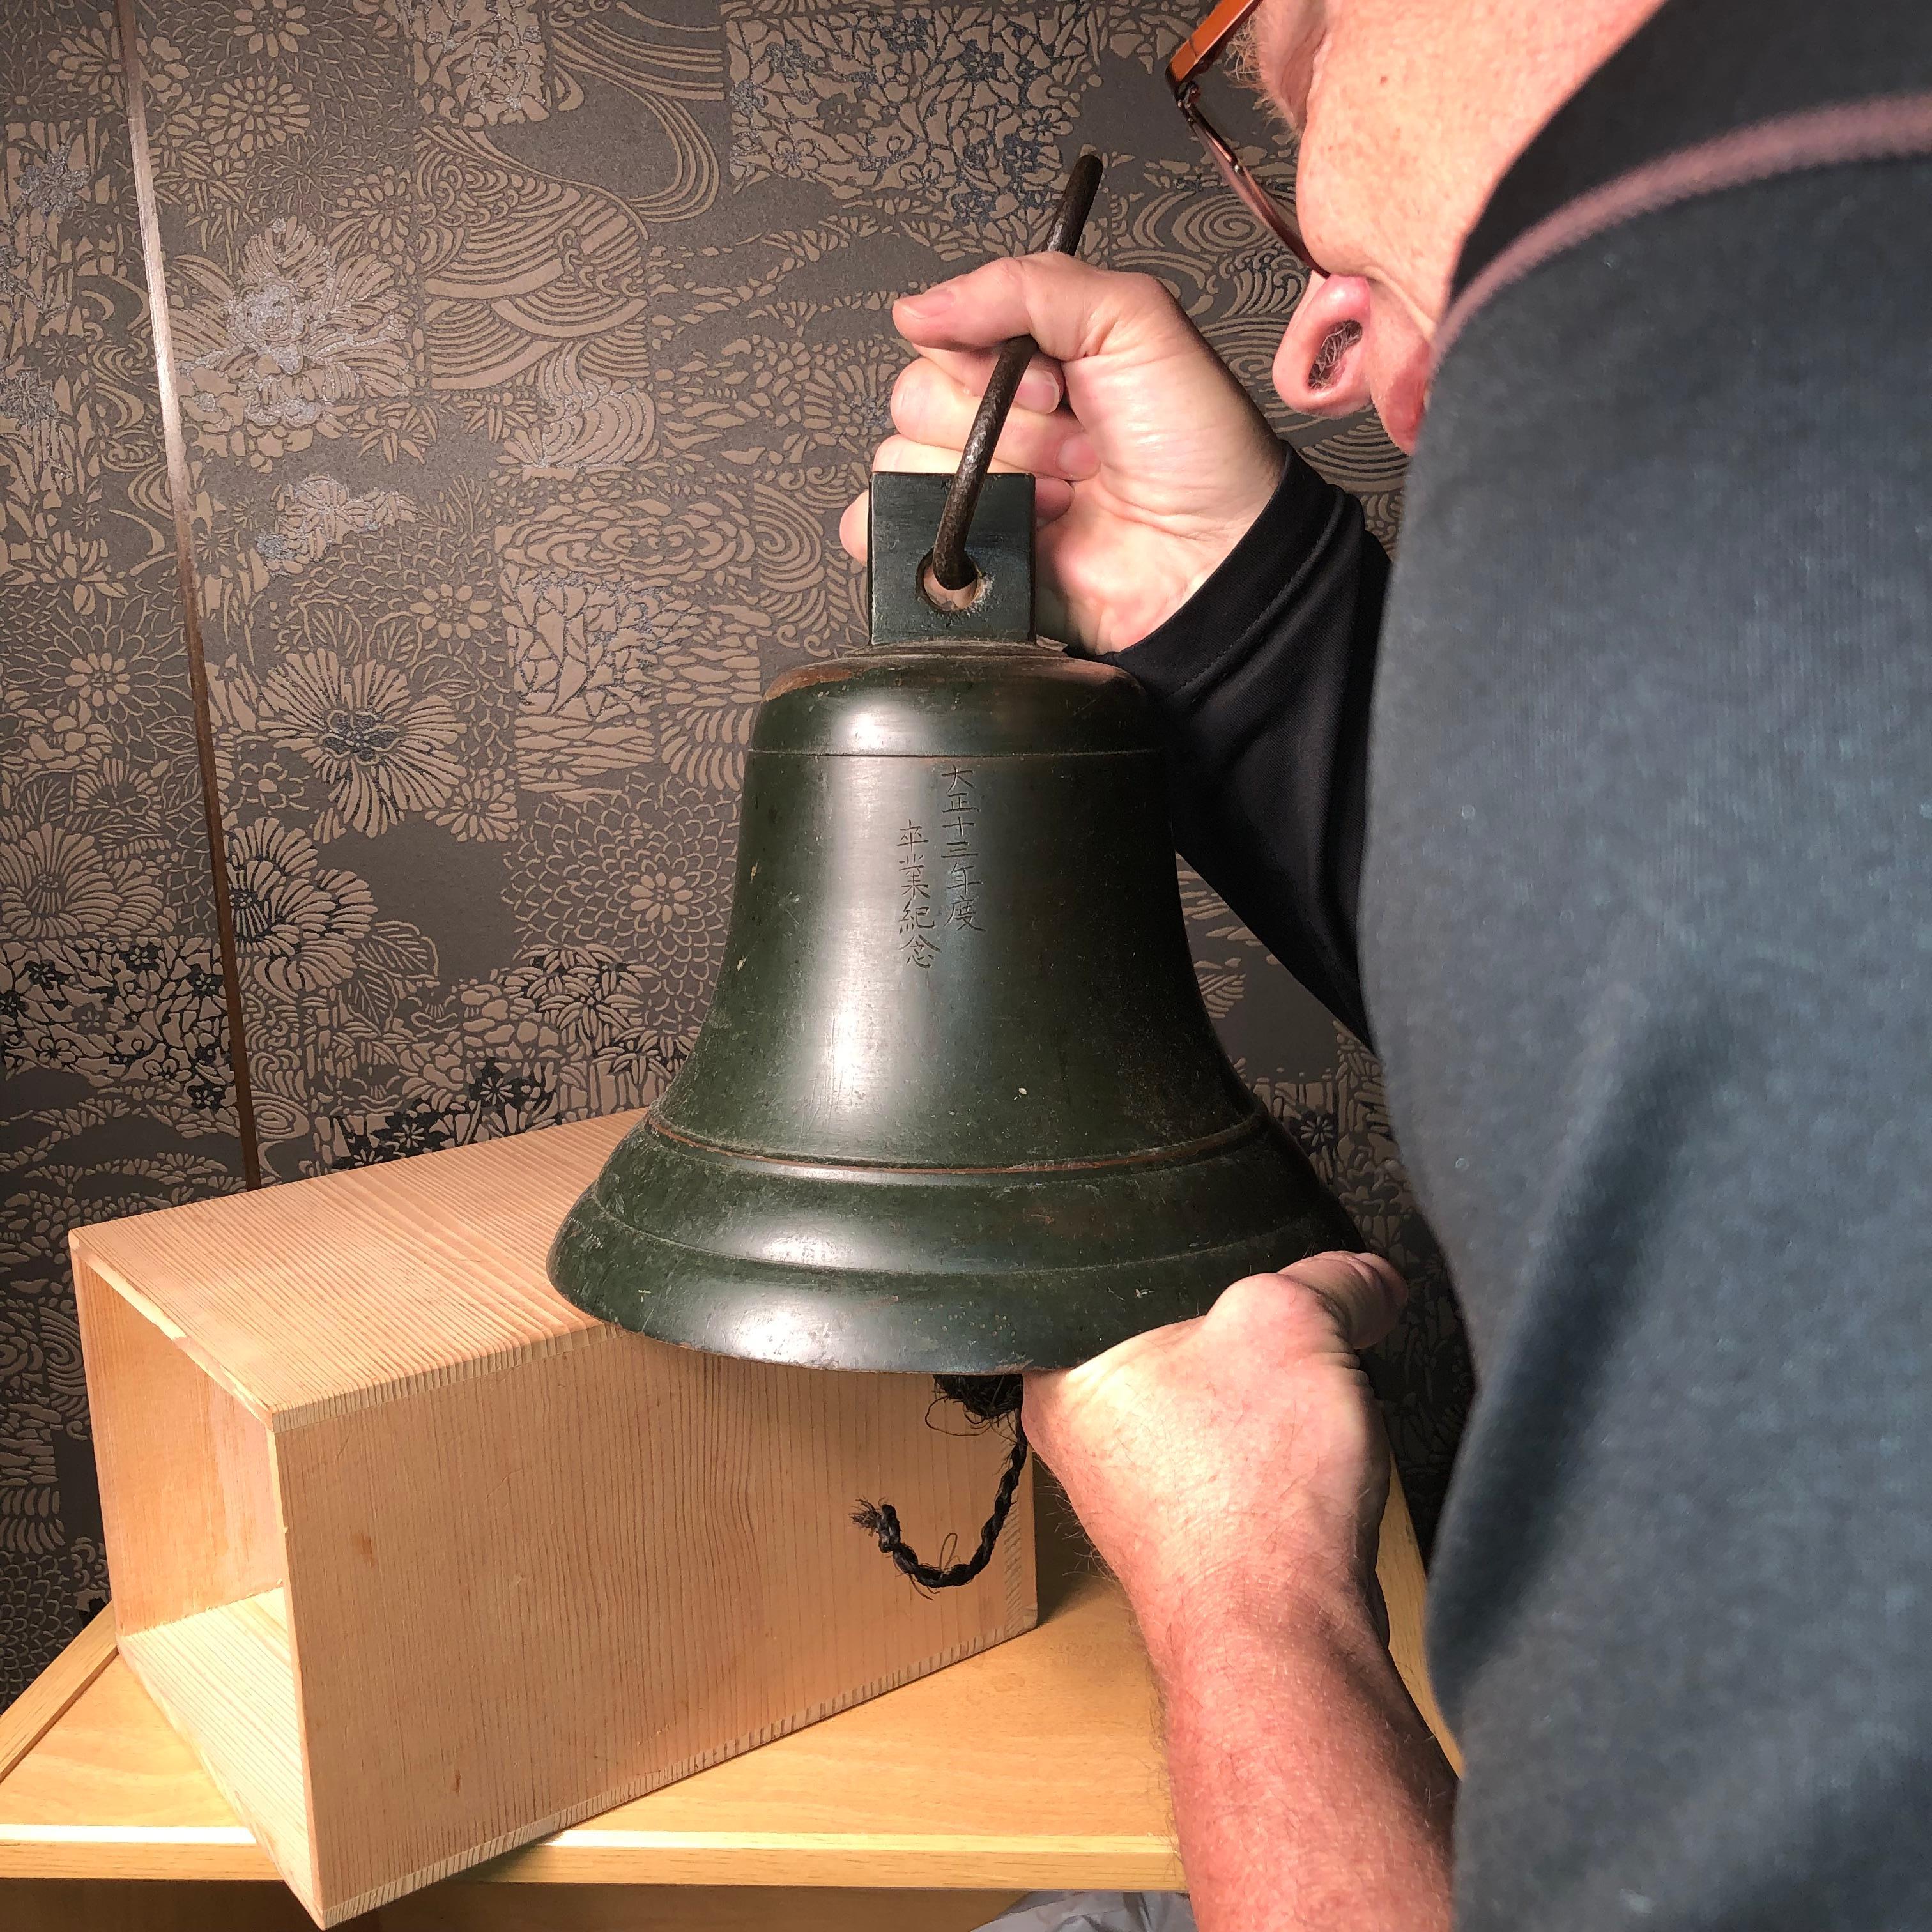 From our recent Japanese Kyoto Acqusitions- good indoor or garden candidate.

An unusual find from Japan.

This is a heavy and solid ships bell cast in solid bronze complete with hanger and clapper. 

We do not find many of these and when we do, we